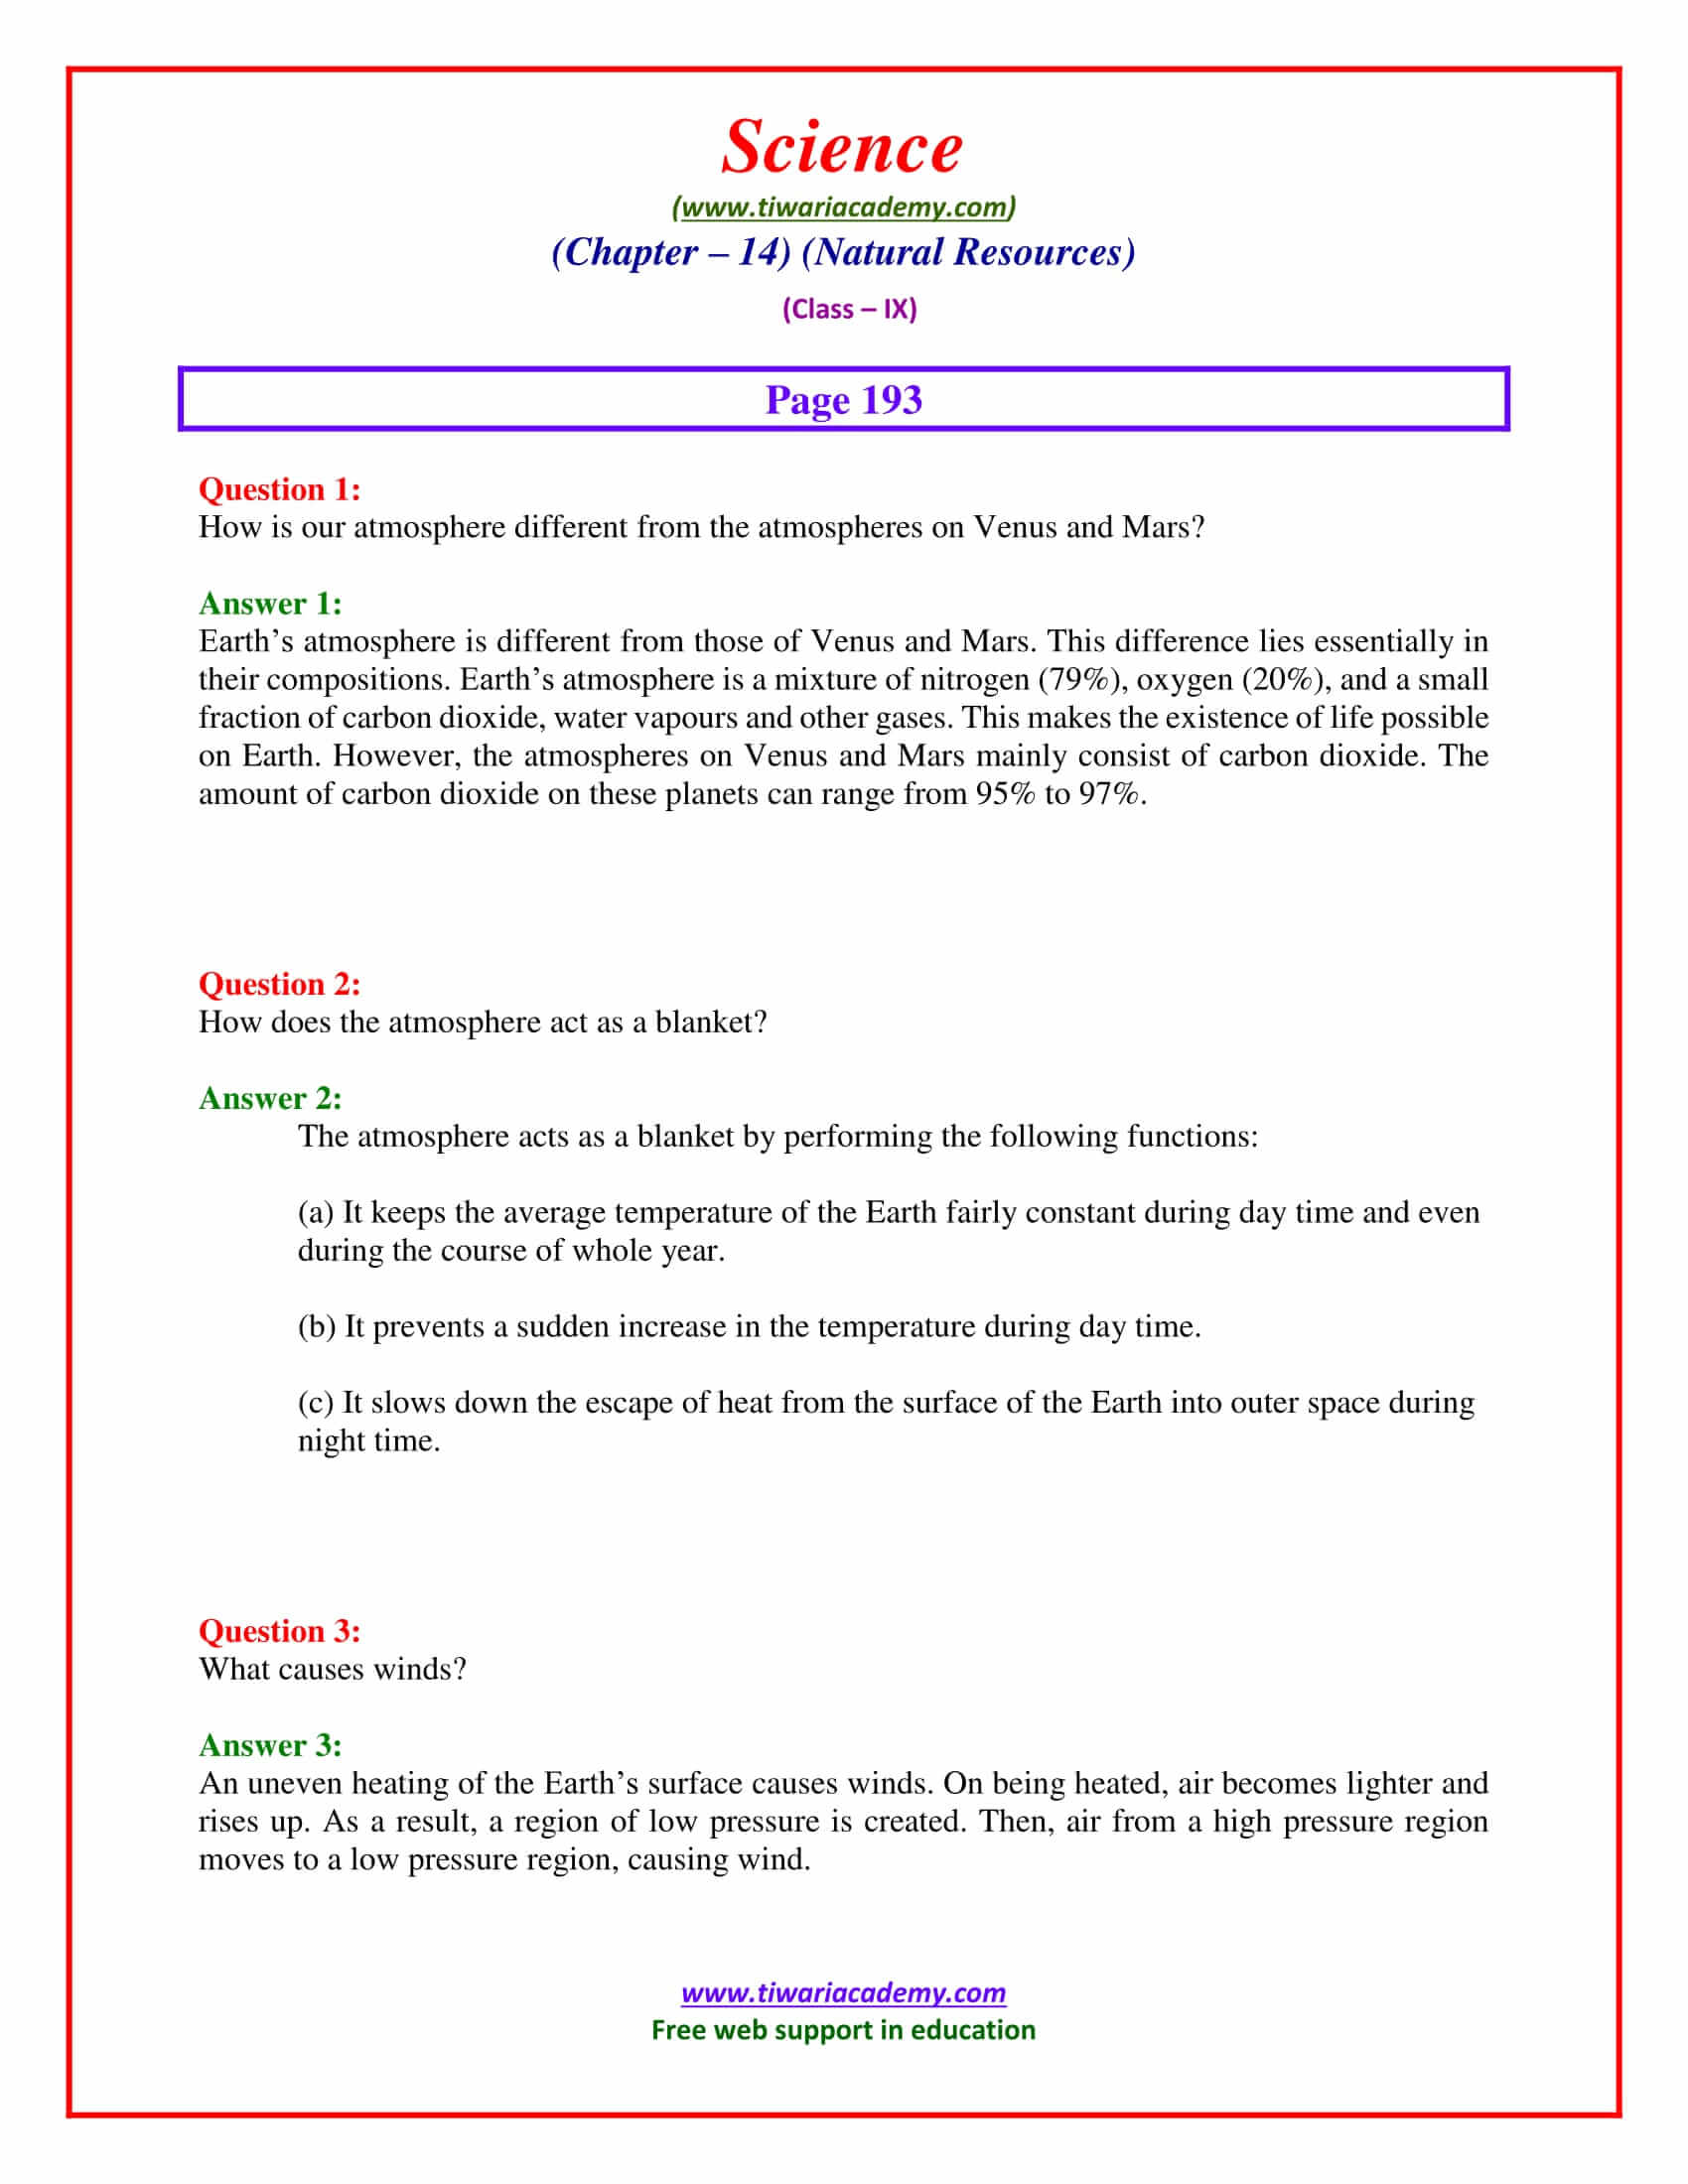 NCERT Solutions for Class 9 Science Chapter 14 Natural Resources Intext Questions Page 193